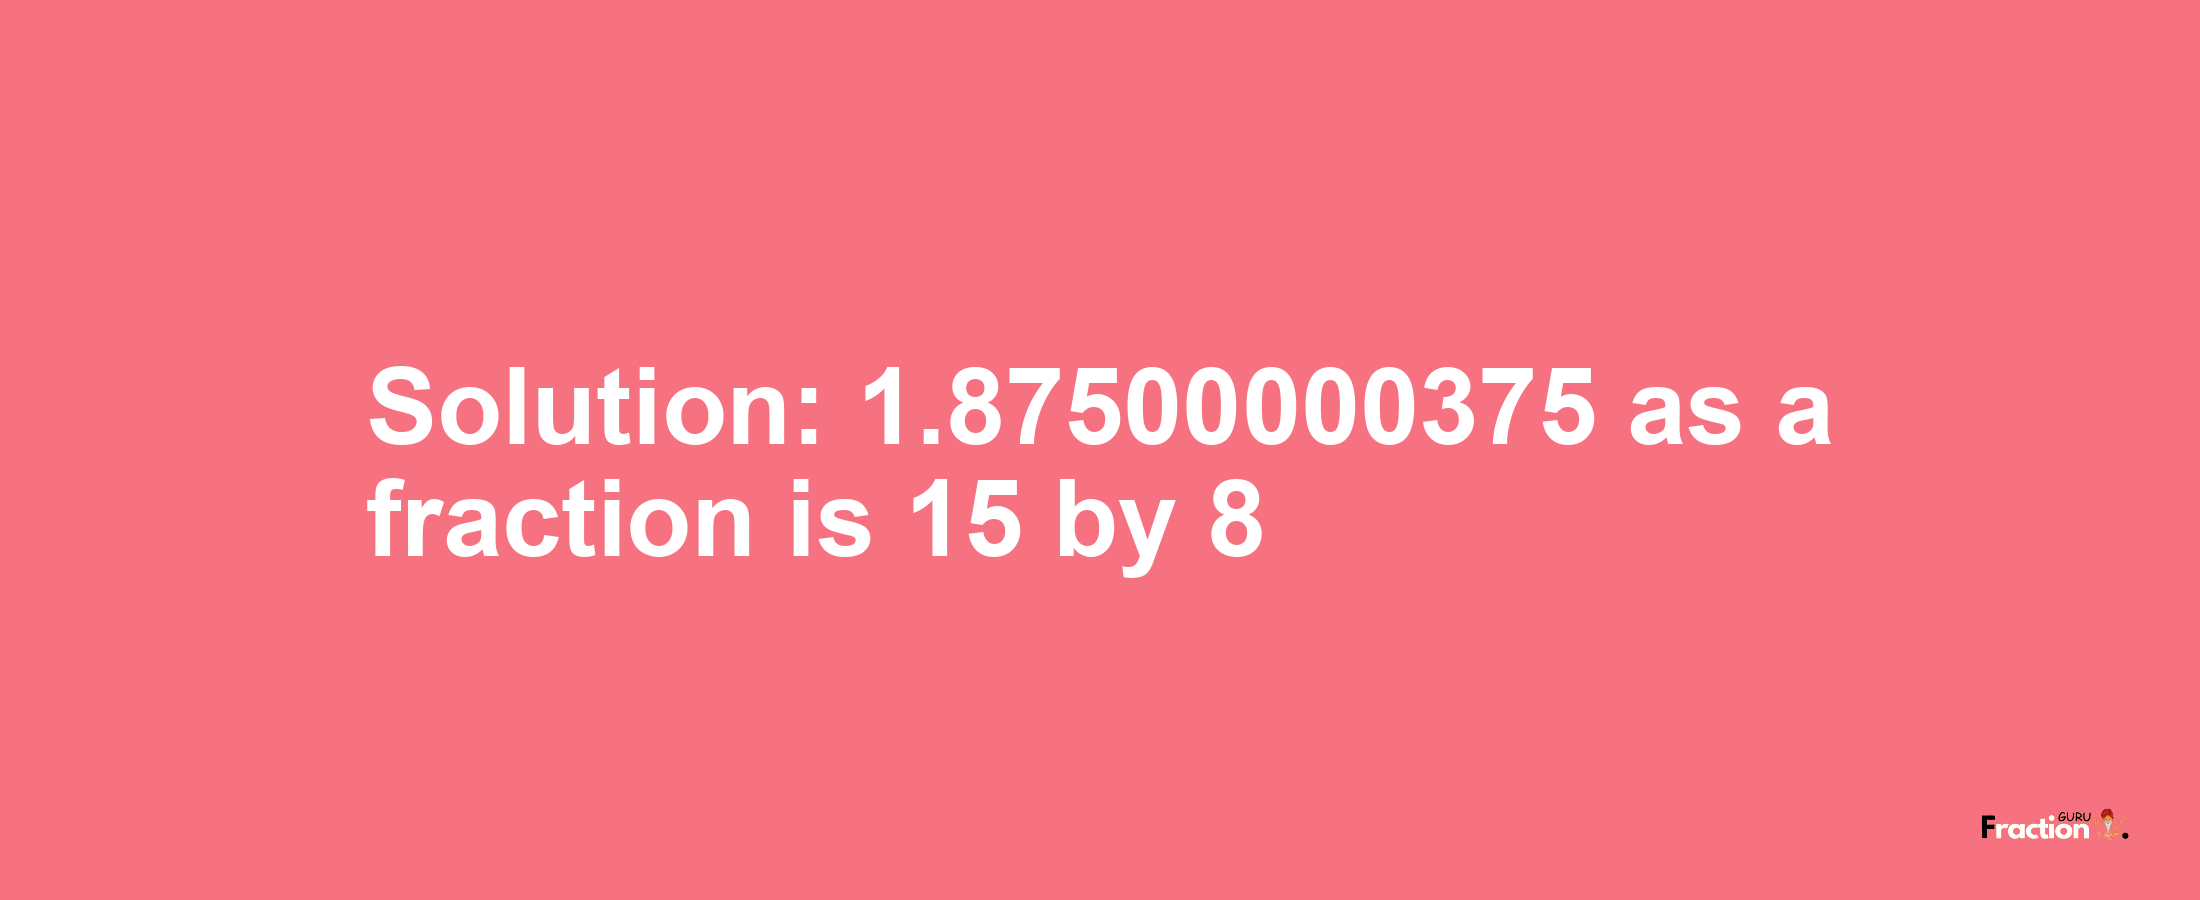 Solution:1.87500000375 as a fraction is 15/8